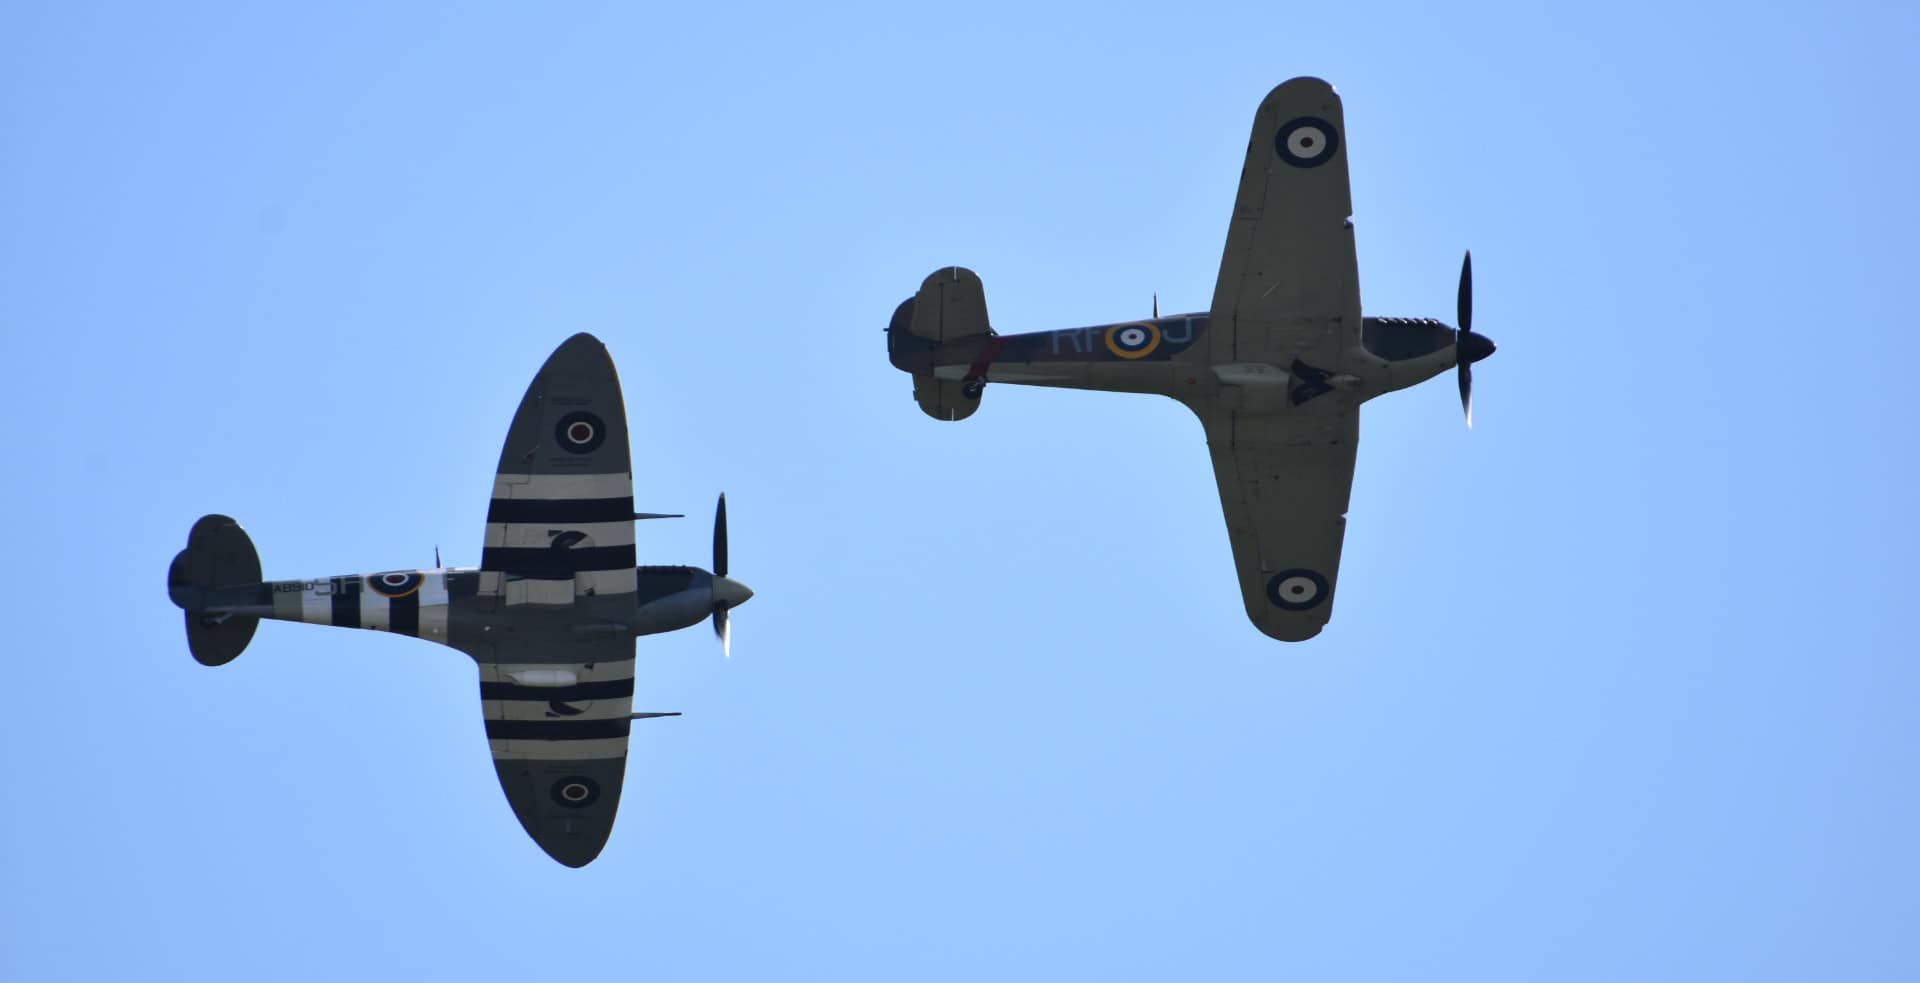 Two Spitfires flying overhead